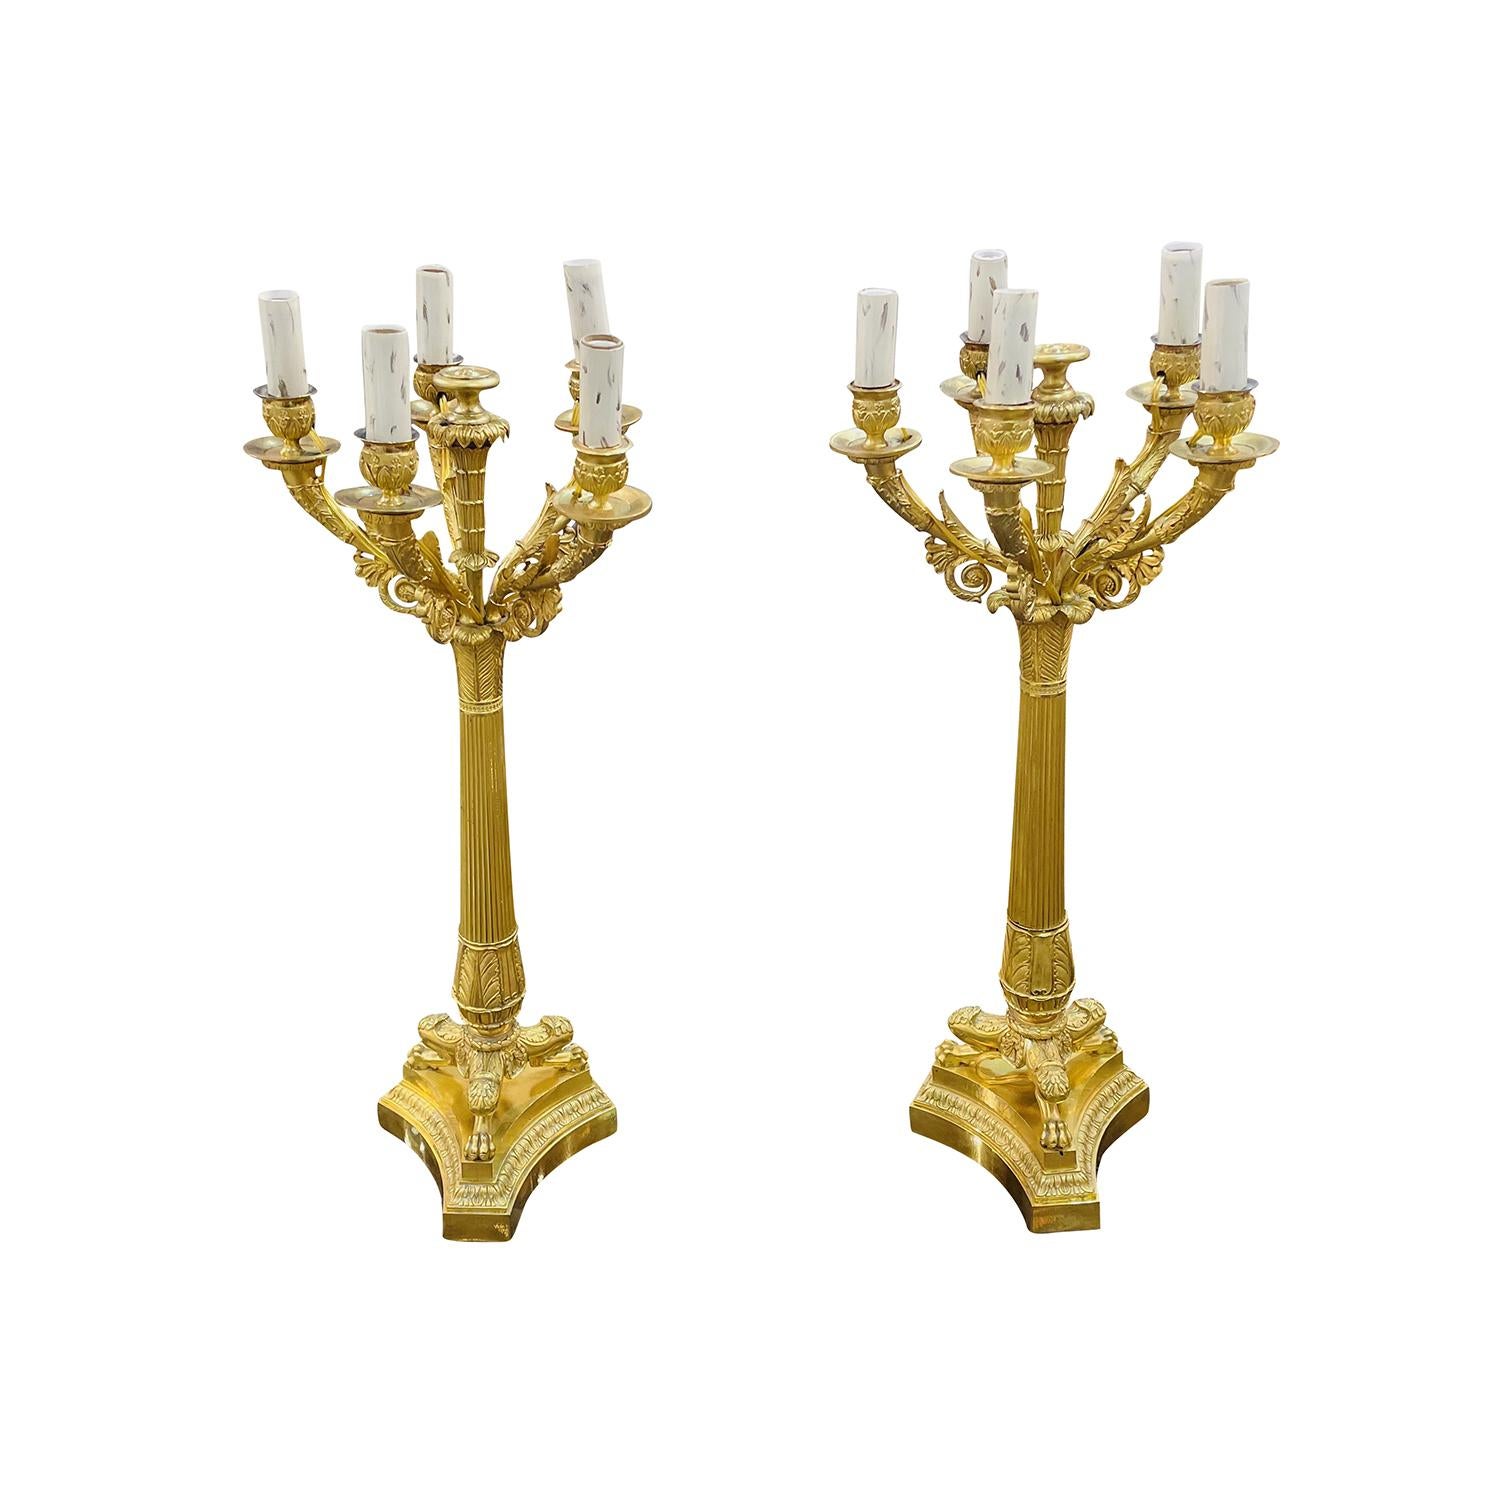 An antique pair of French Charles X candle holders, lights made of hand crafted gilded bronze, in good condition. Each of the detailed candelabras are composed with five candle sticks which are halted by short curved arms, supported by a tapering